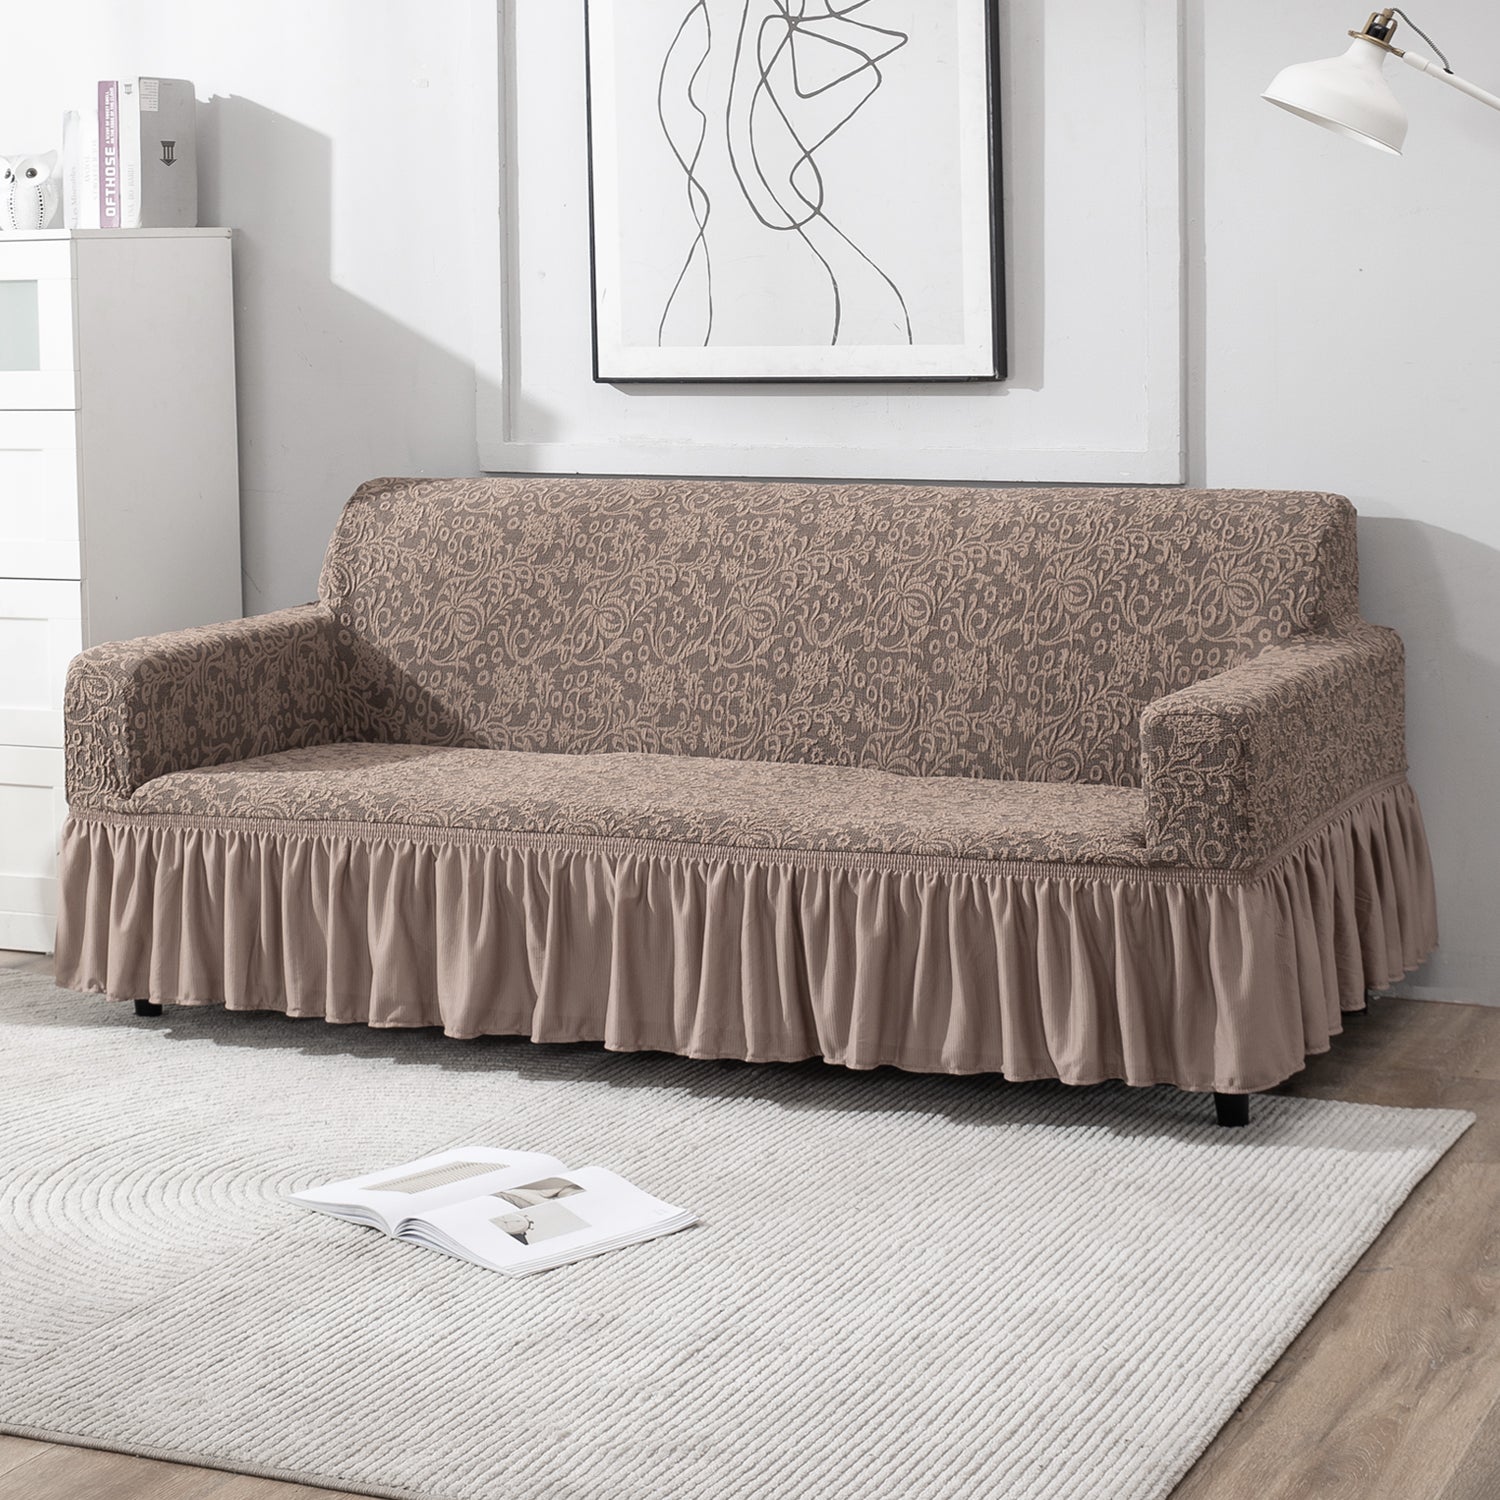 Elastic Stretchable Designer Woven Jacquard Sofa Cover with Frill, Light Taupe